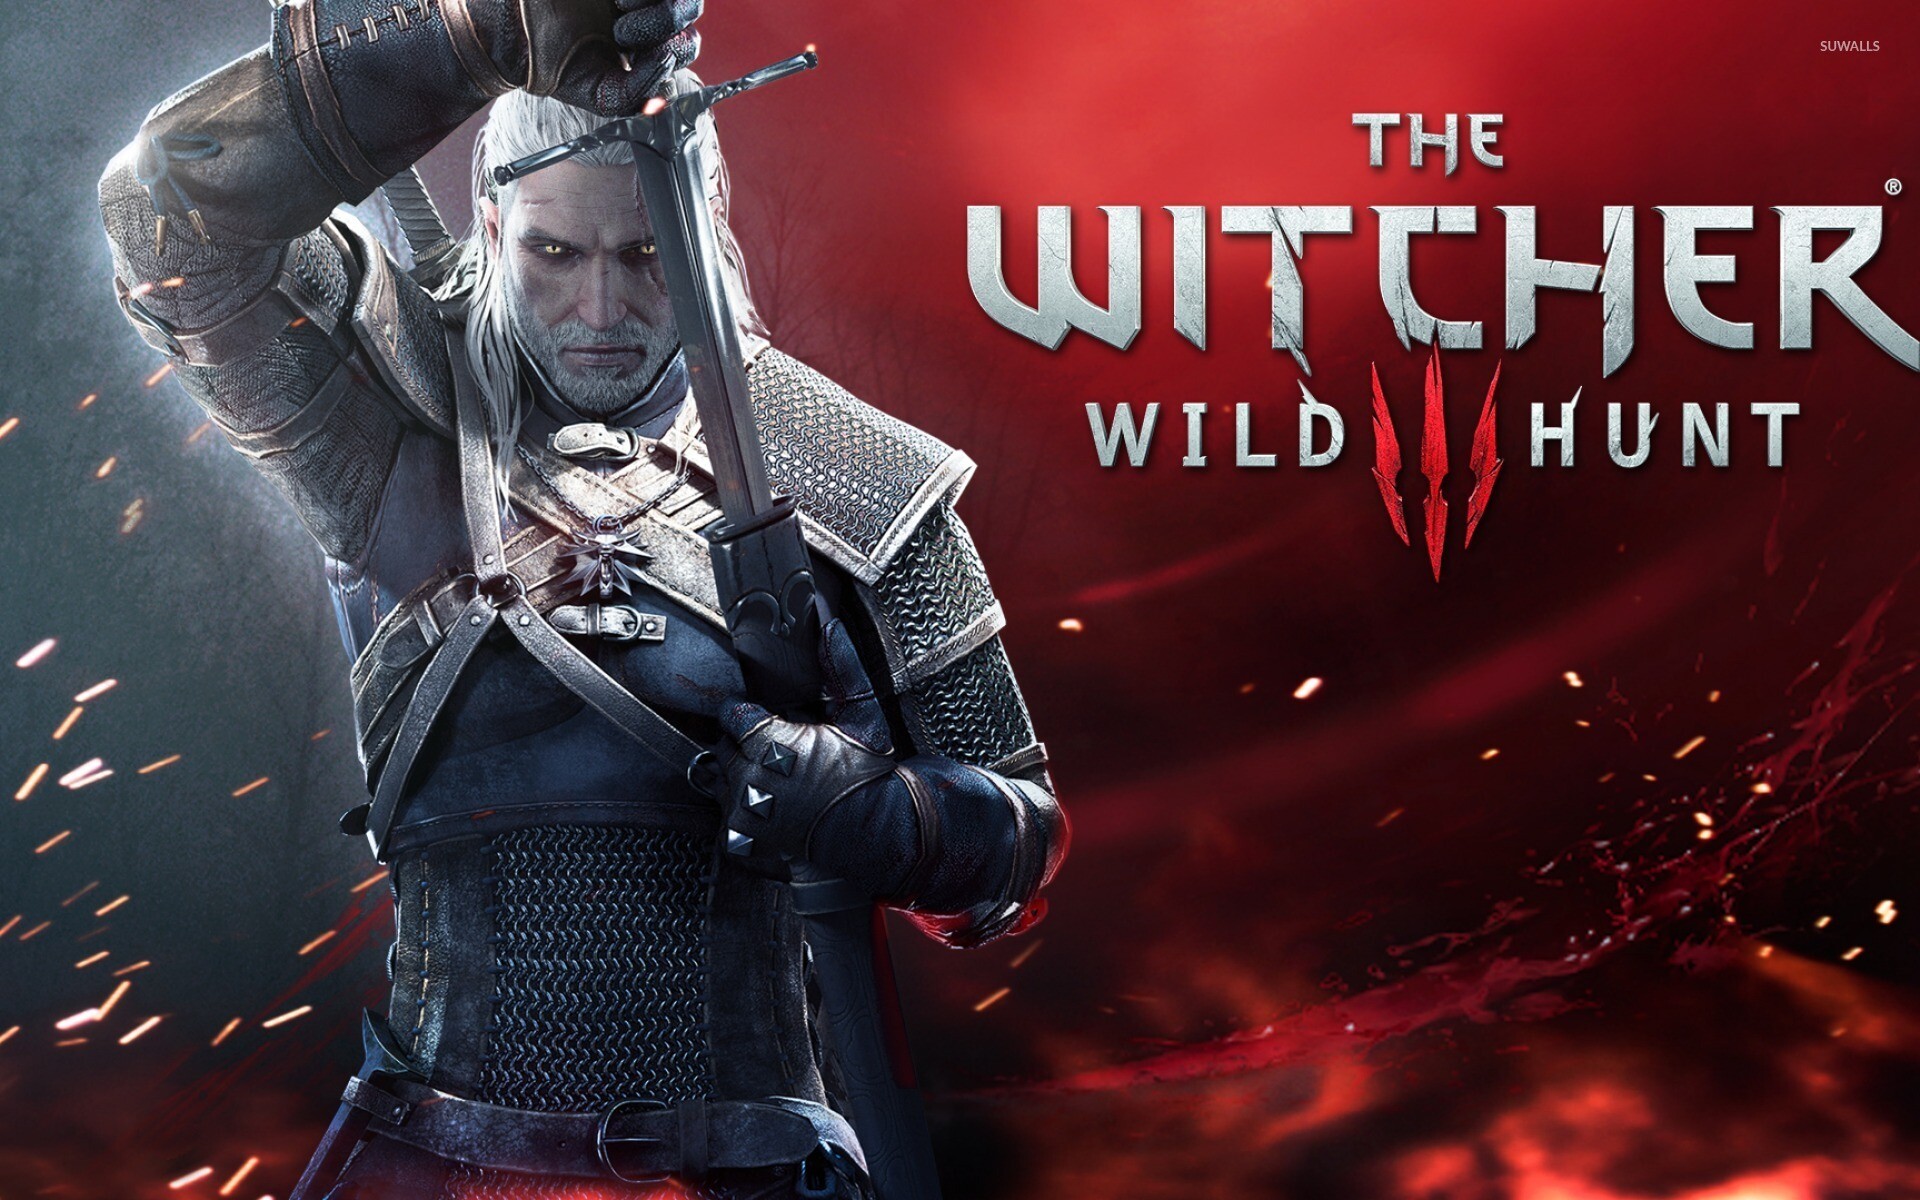 The Witcher (Game): Wild Hunt, A story-driven, next-generation open world. 1920x1200 HD Wallpaper.